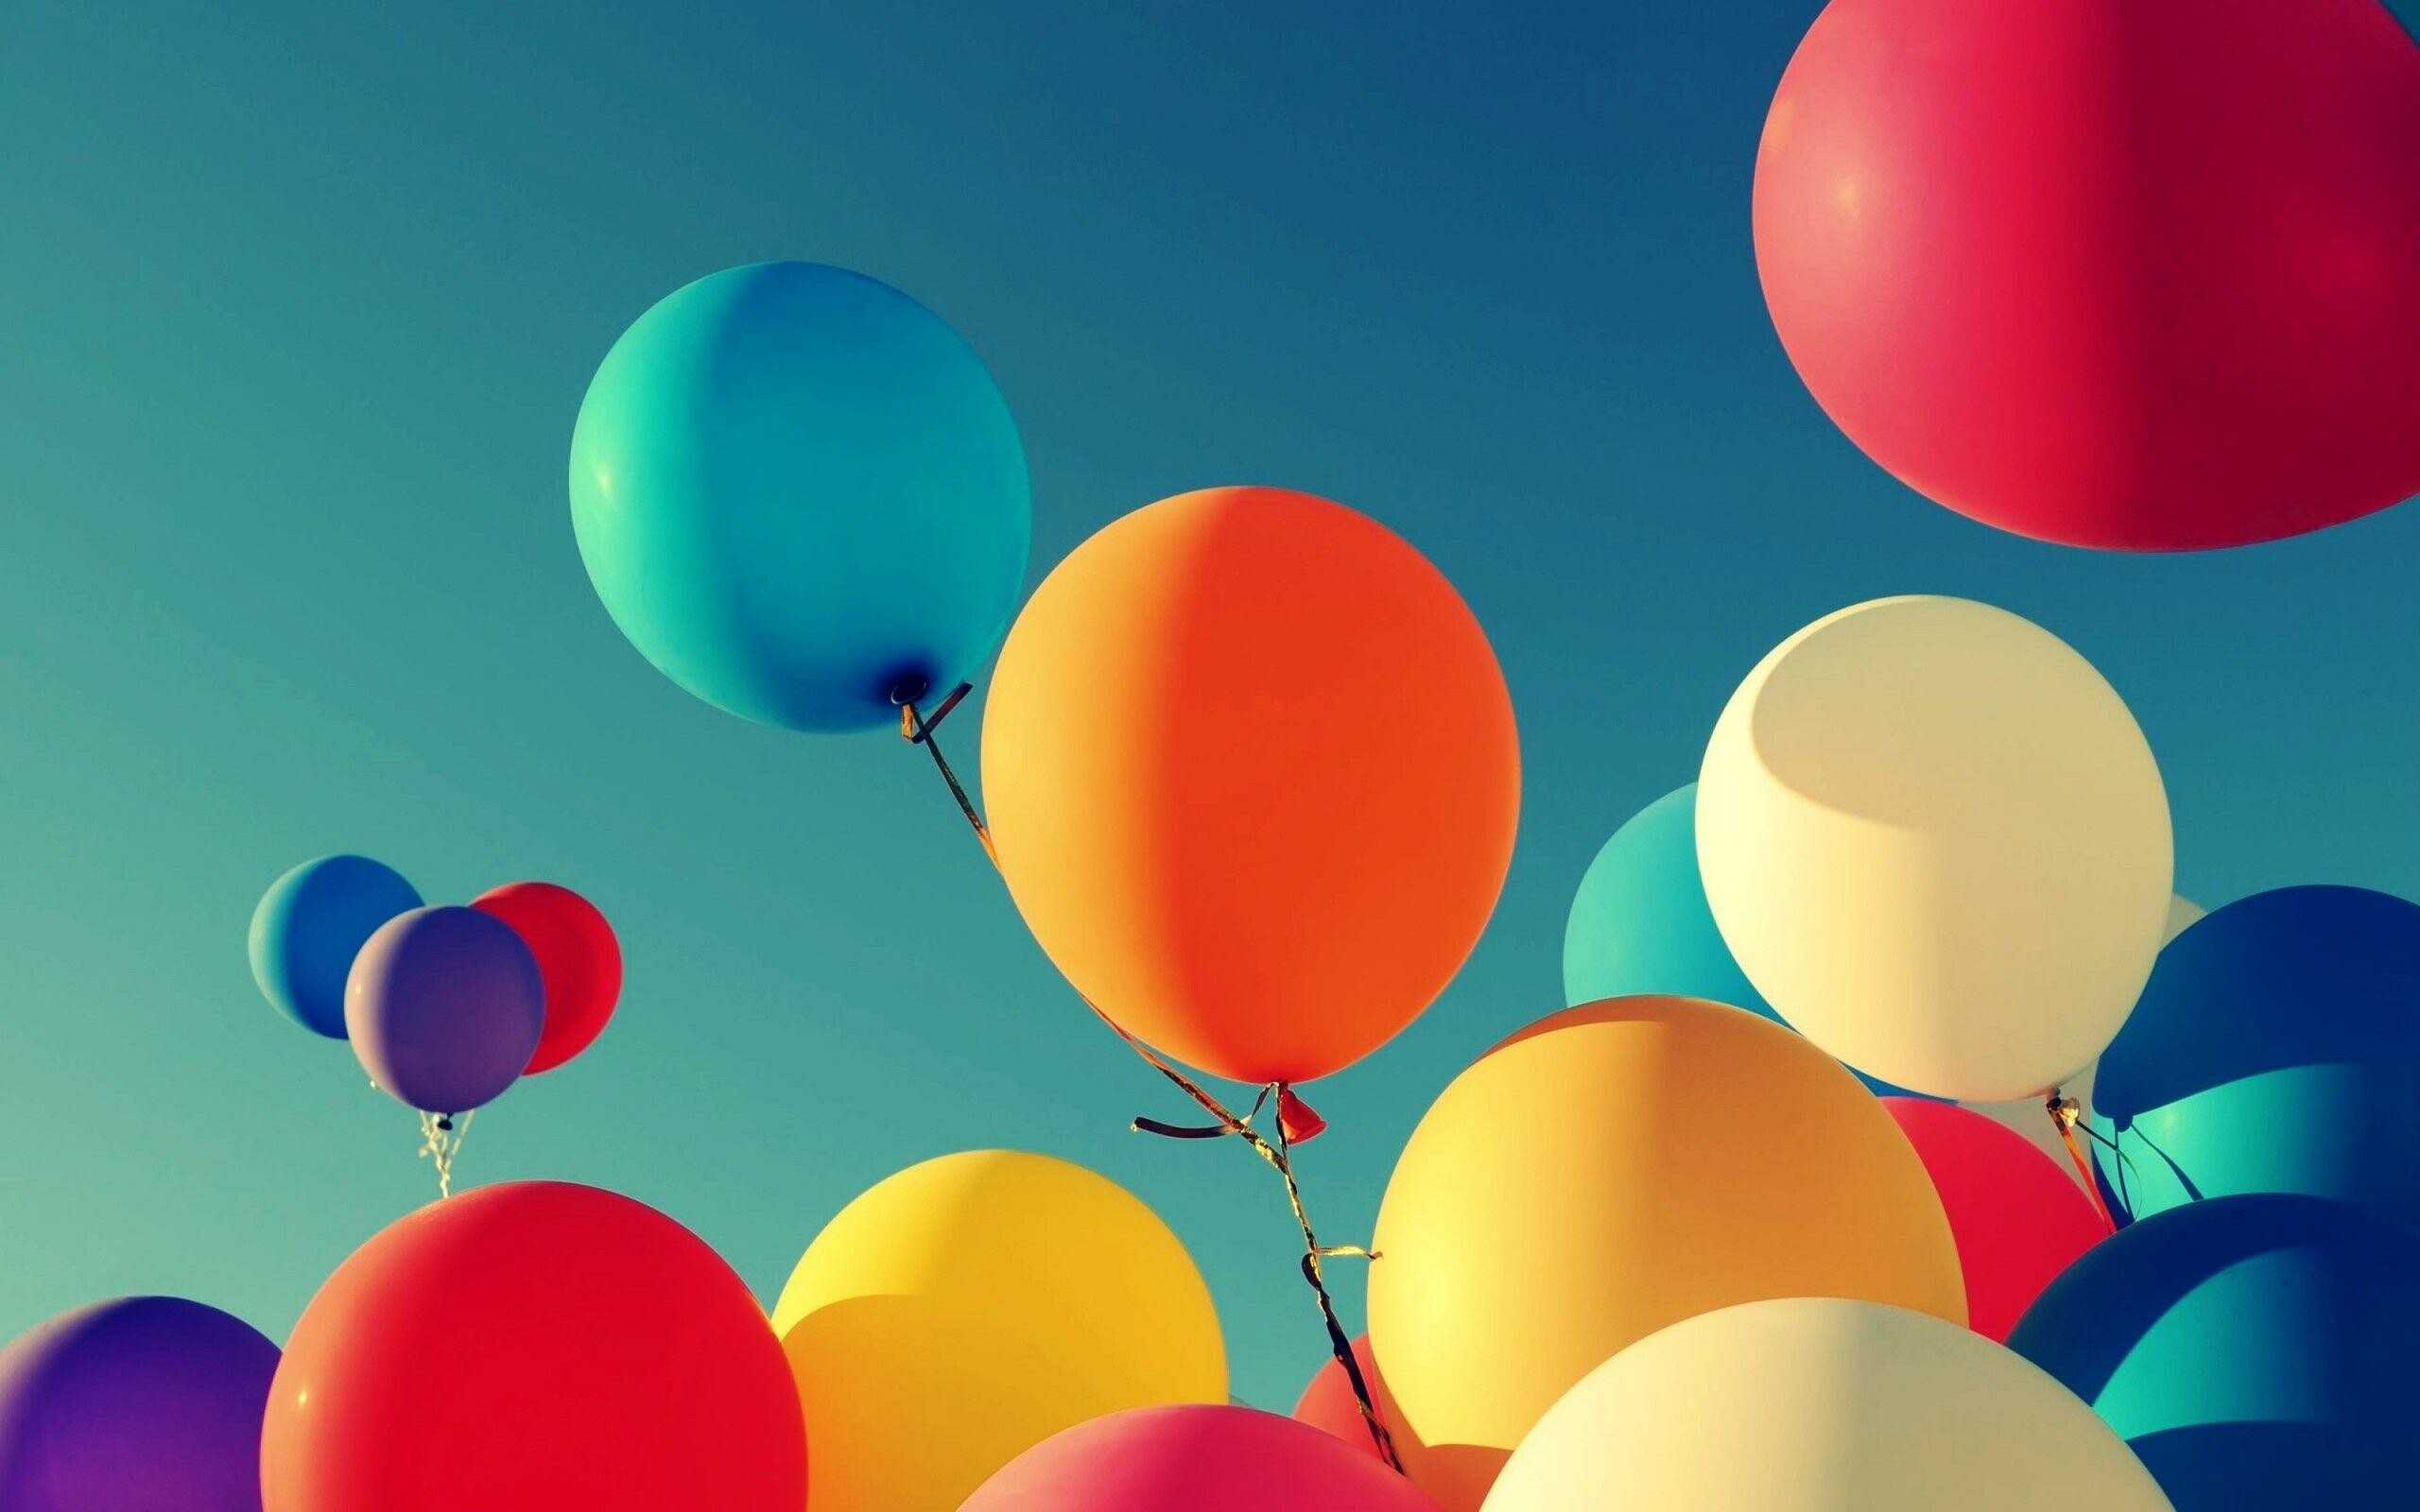 Balloons: Used for or entertaining purposes, Colorfulness, Joy. 2560x1600 HD Wallpaper.